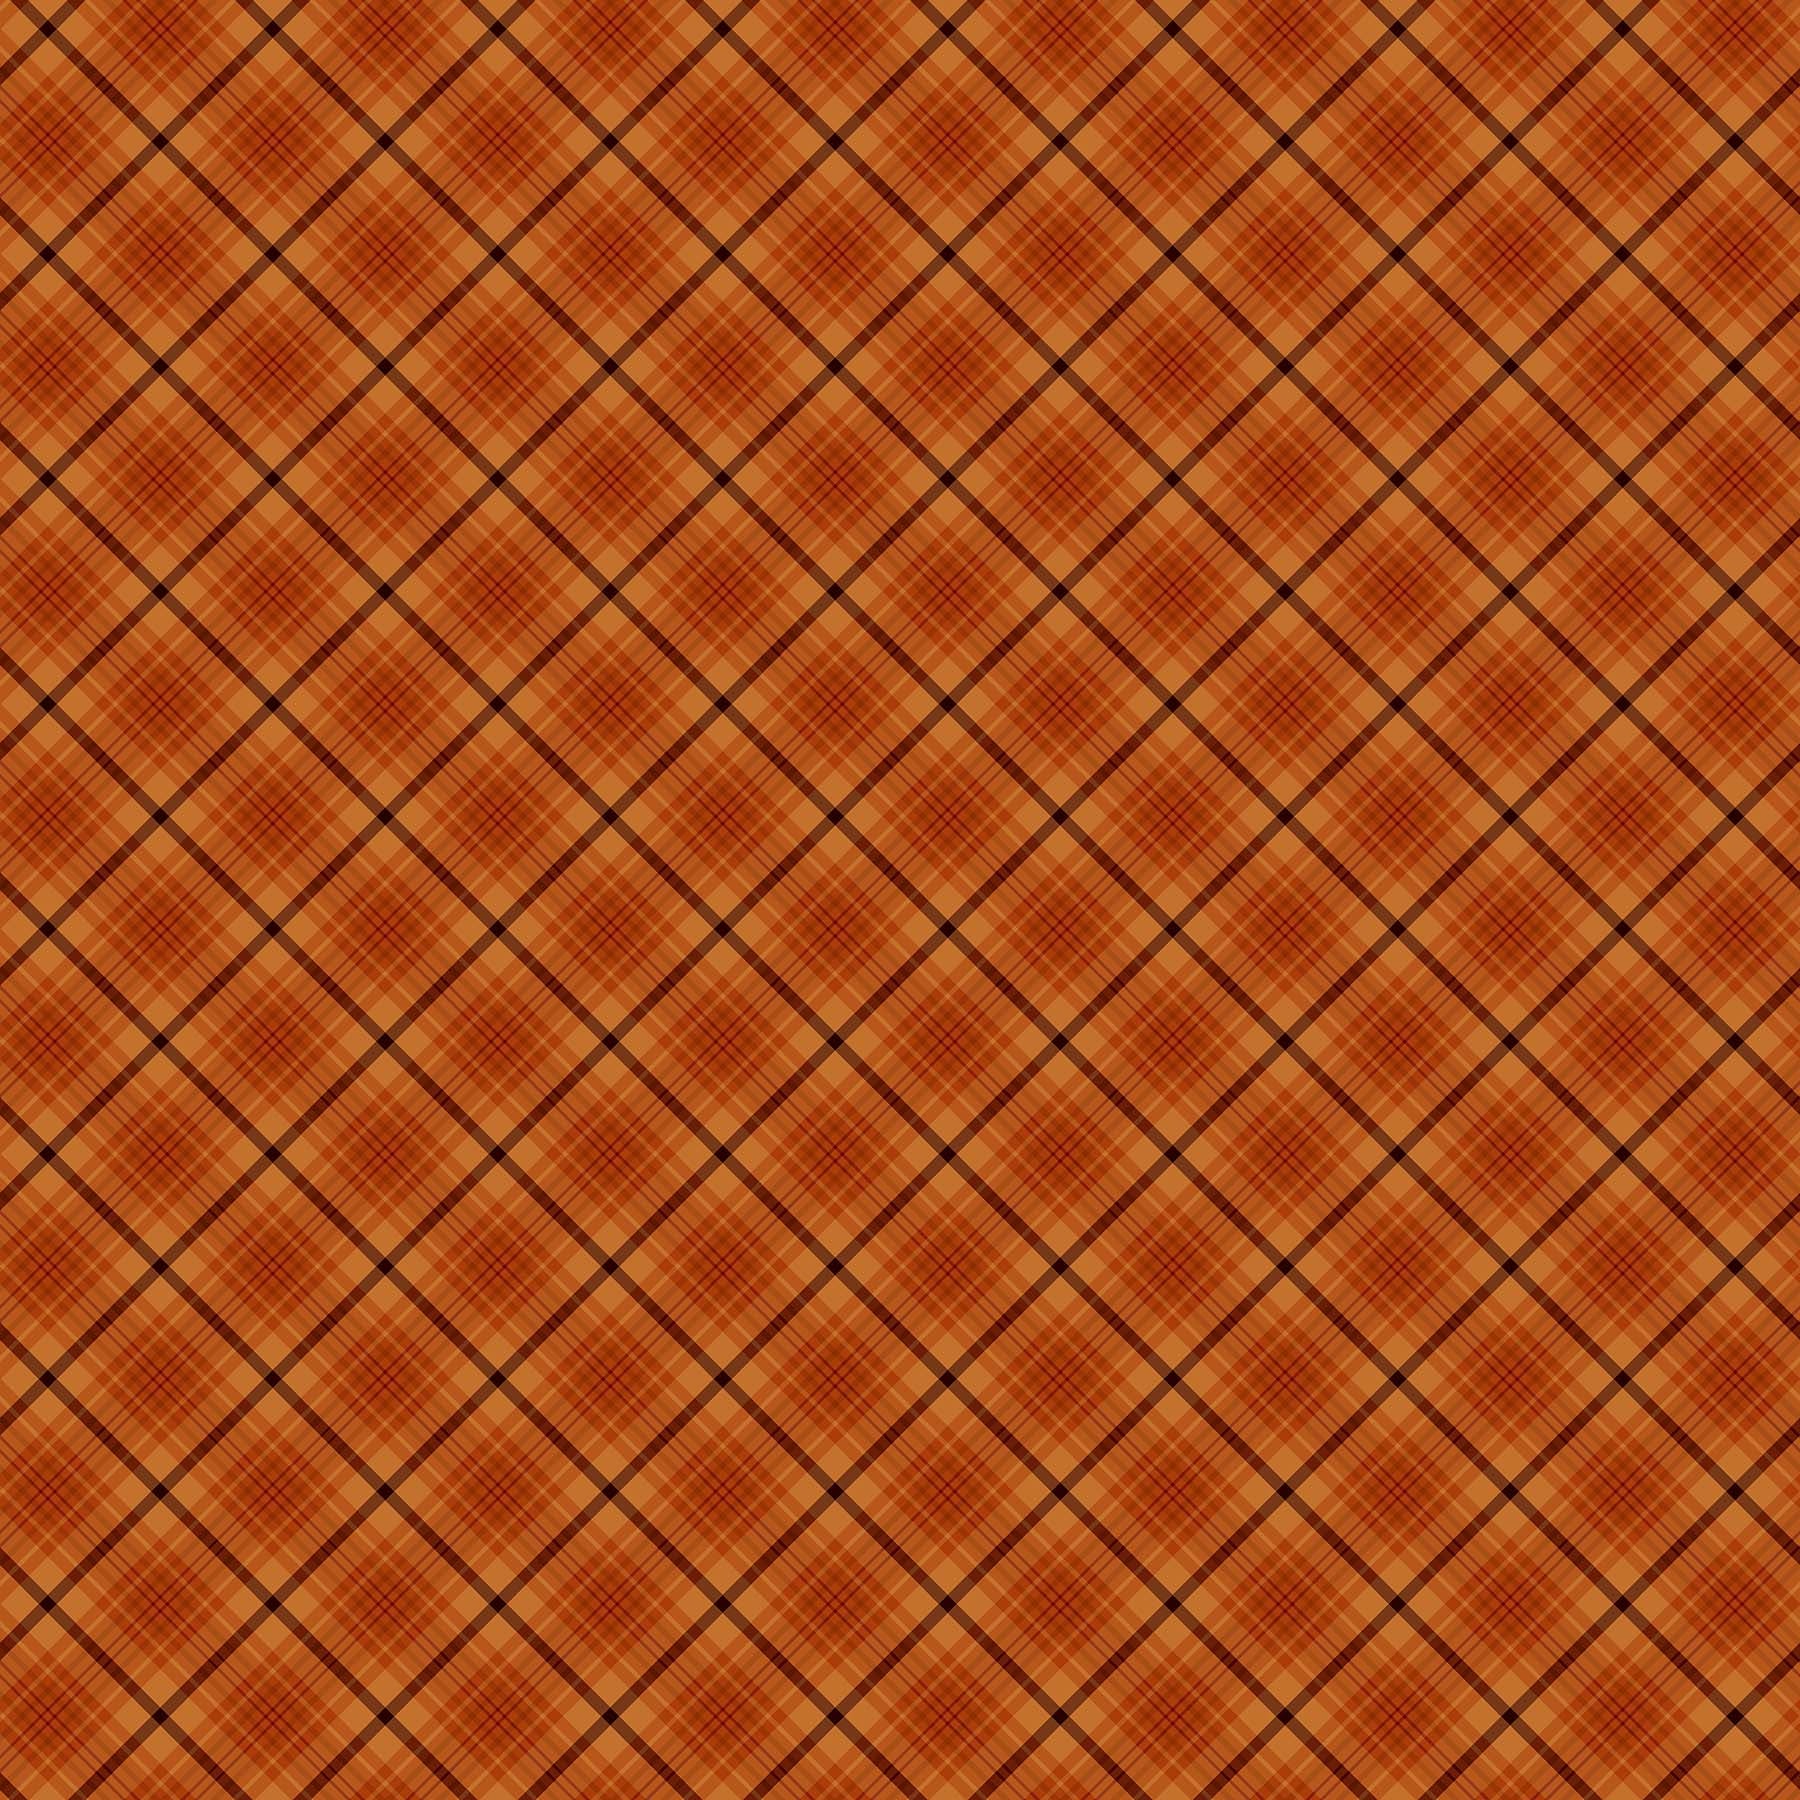 Northcott Fabric by the Yard FQ (18" x 21") Bias Plaid from Sunshine Harvest Collection 25460-58